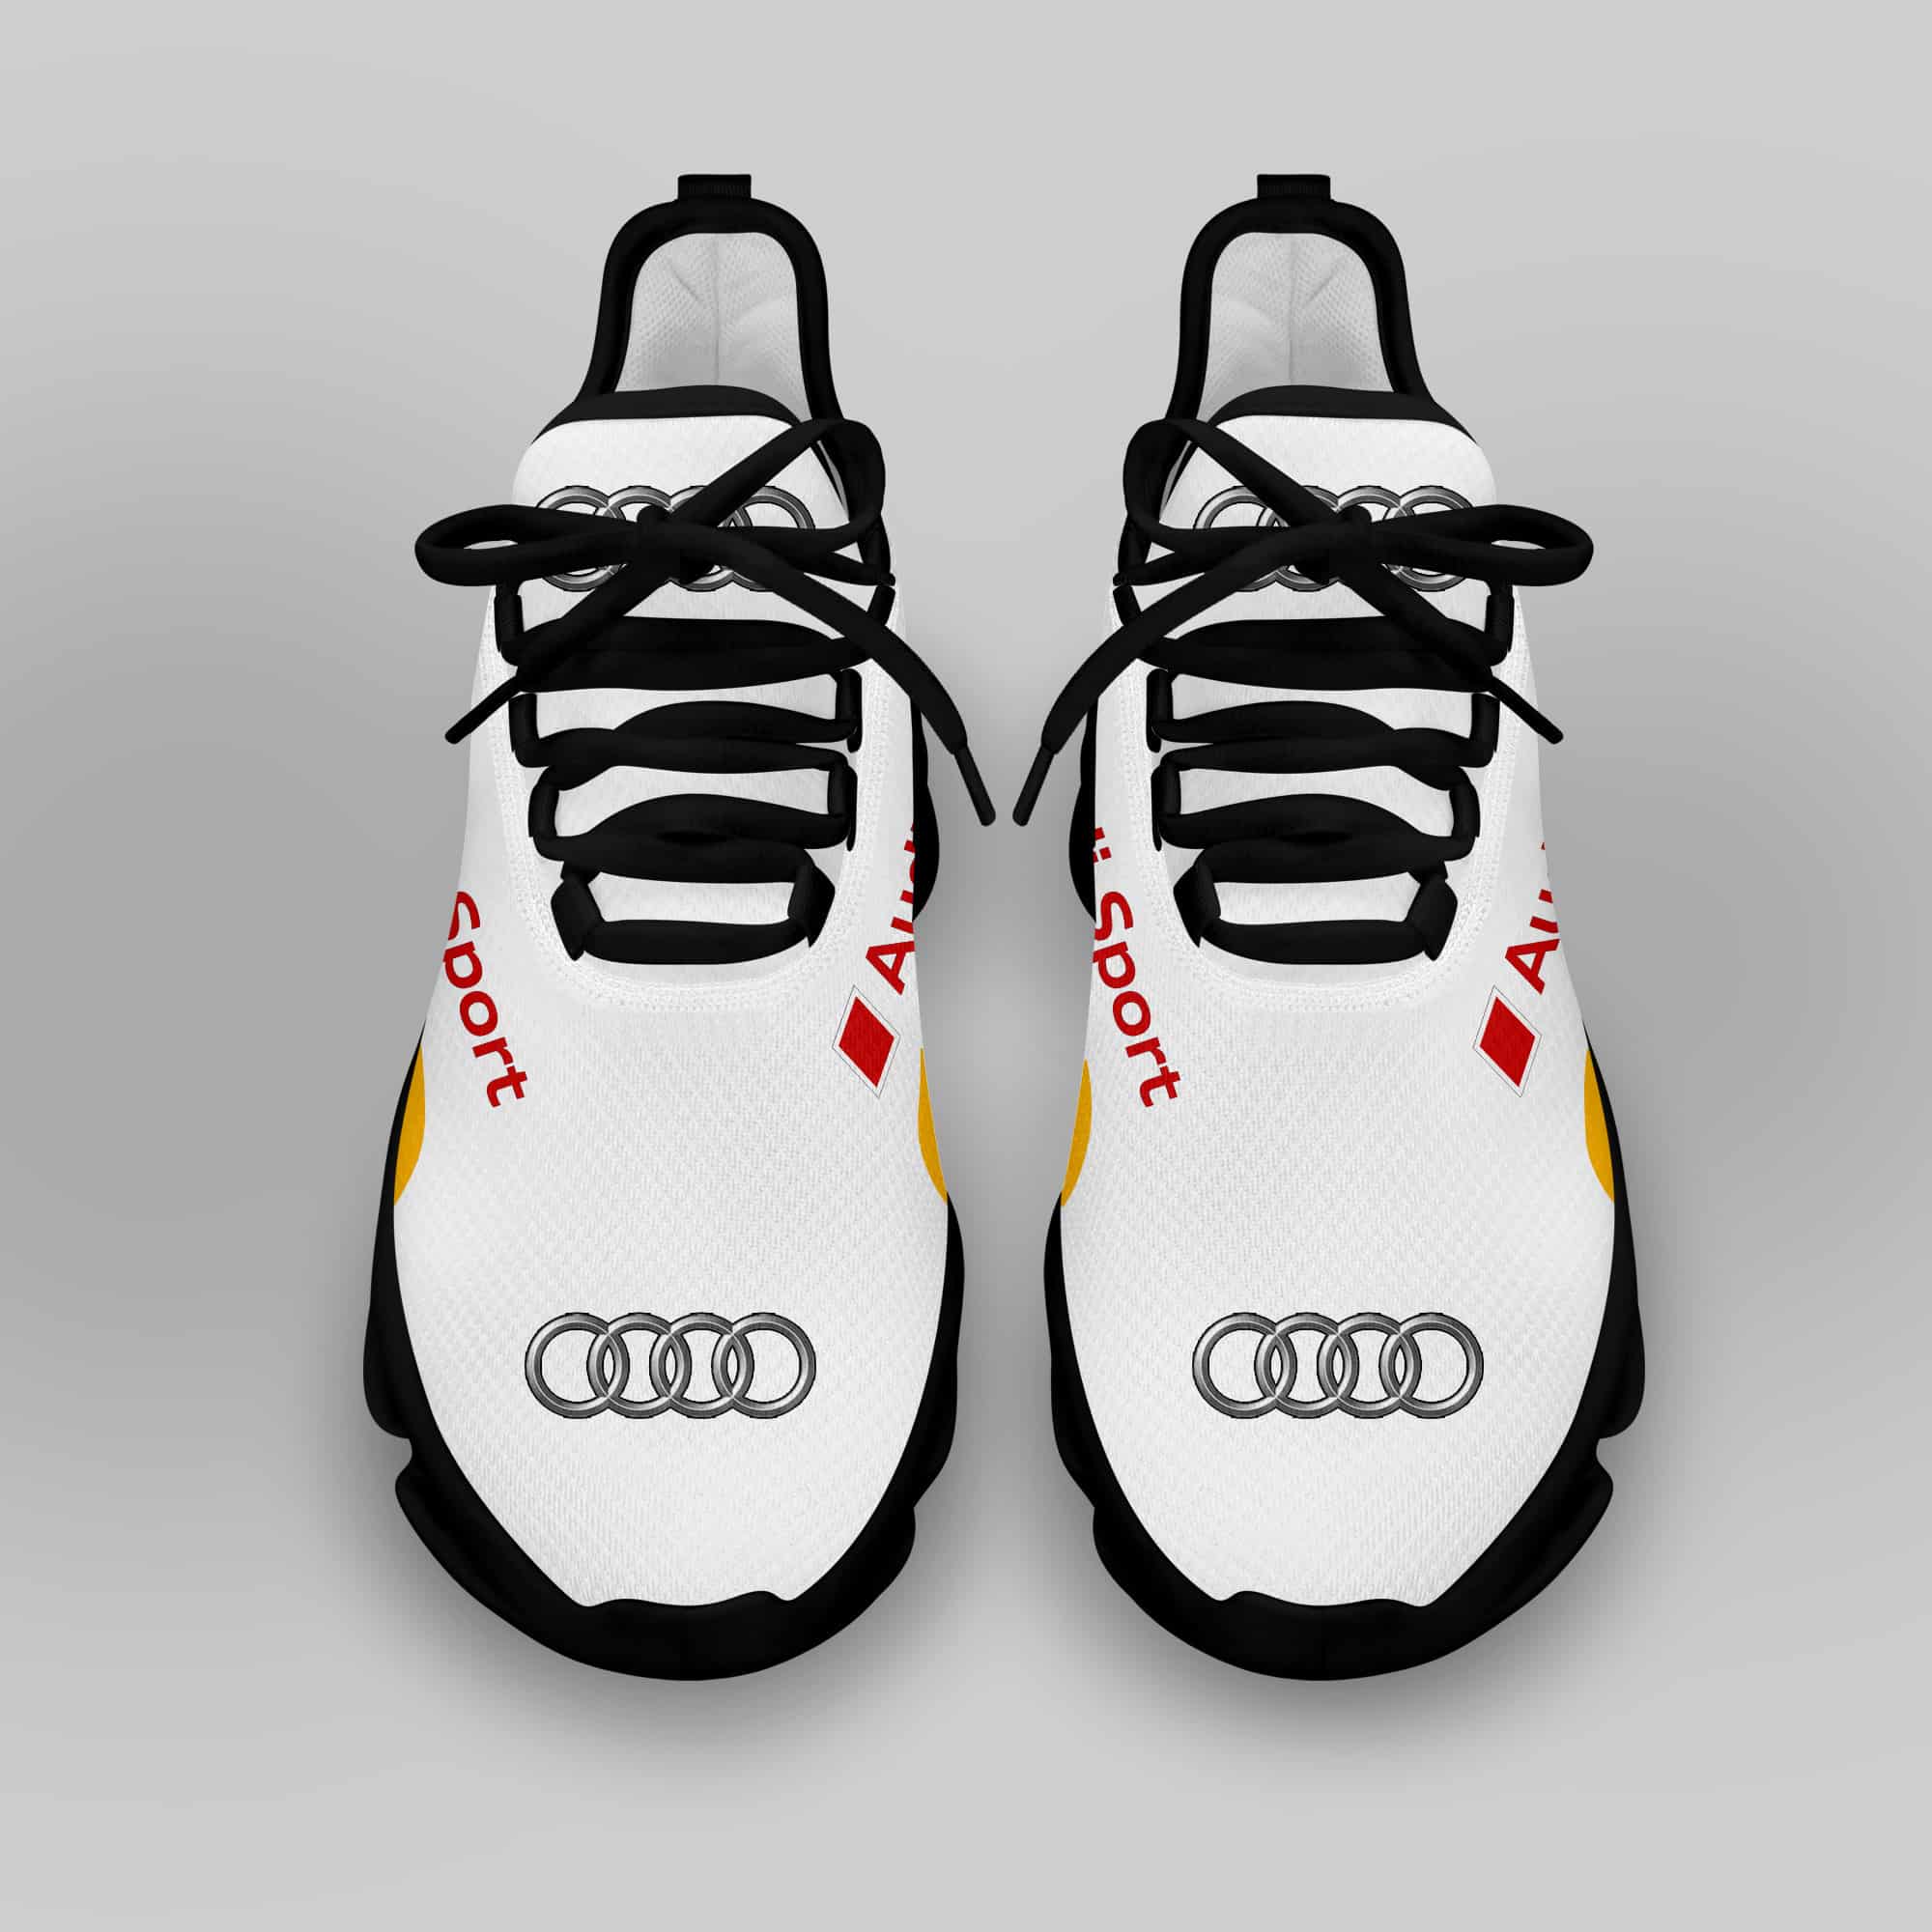 Audi Sport Running Shoes Max Soul Shoes Sneakers Ver 24 4